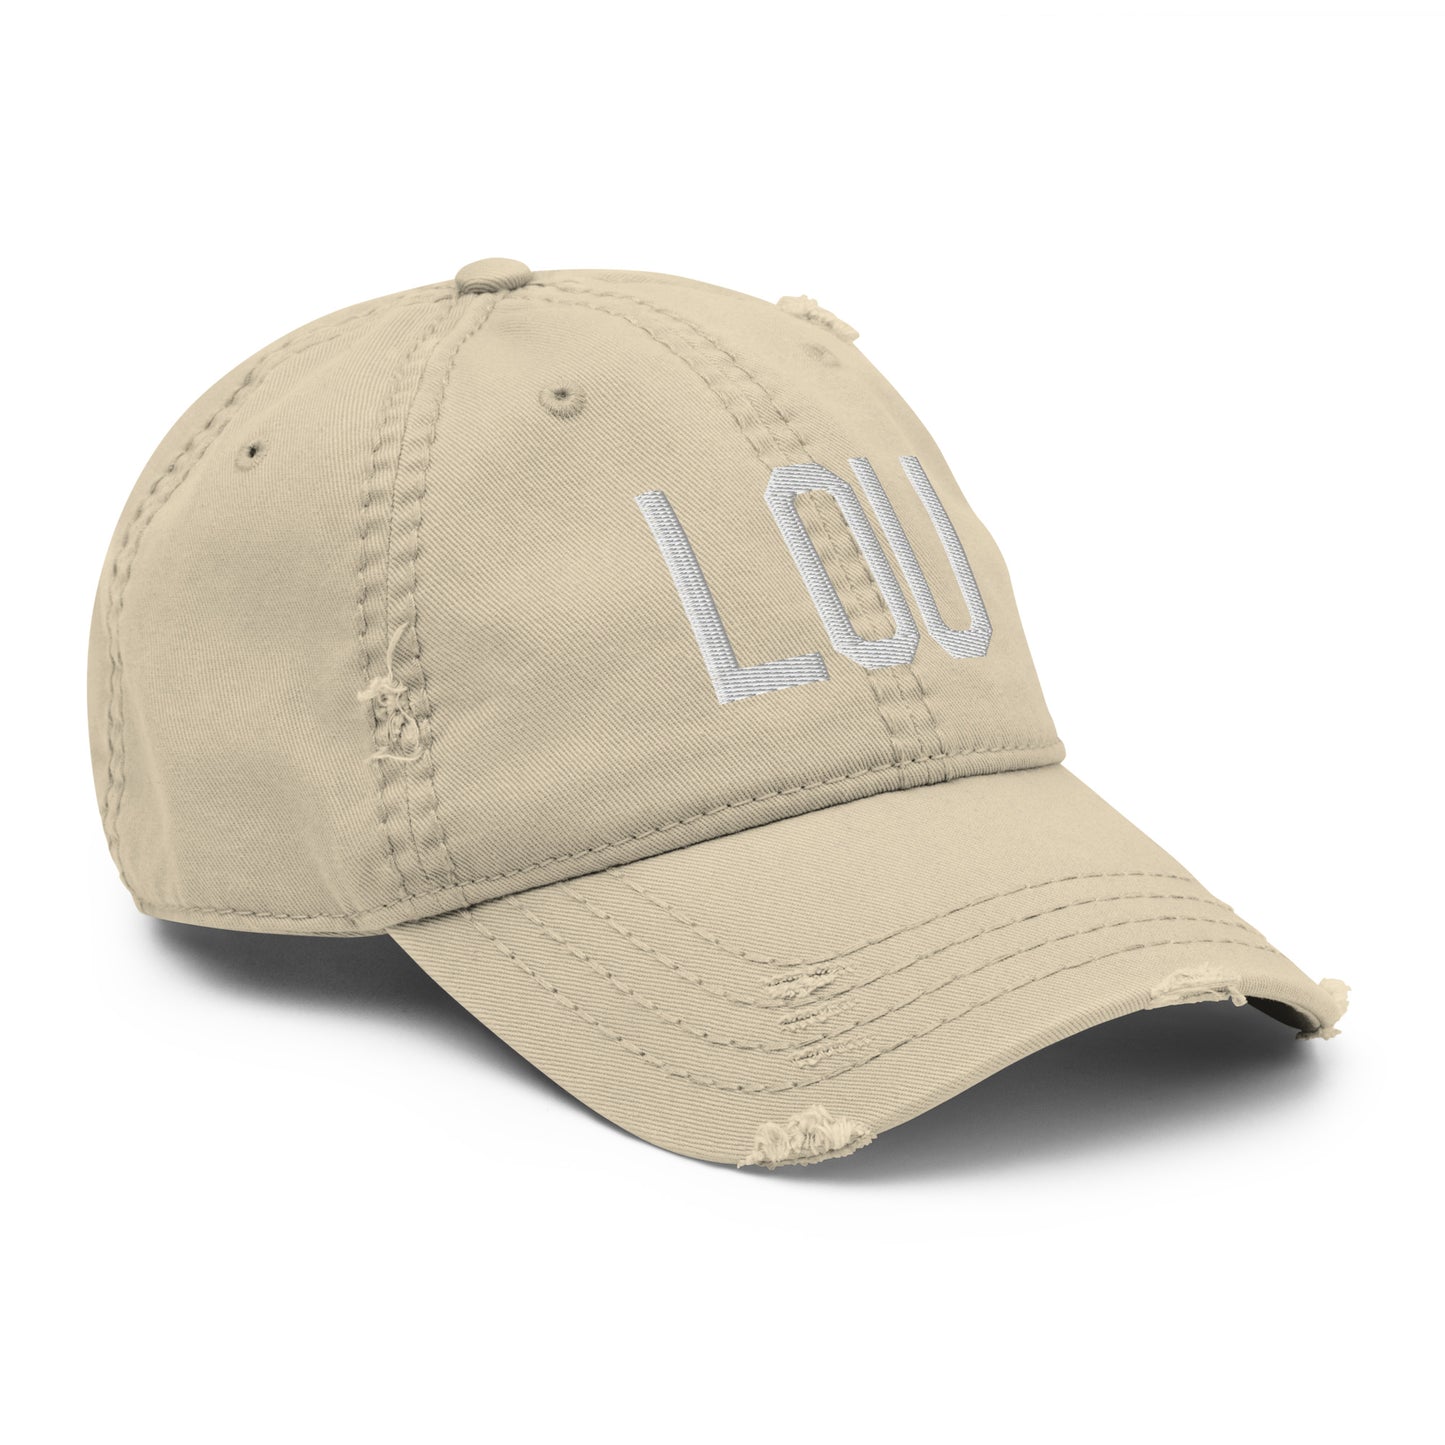 Airport Code Distressed Hat - White • LOU Louisville • YHM Designs - Image 20